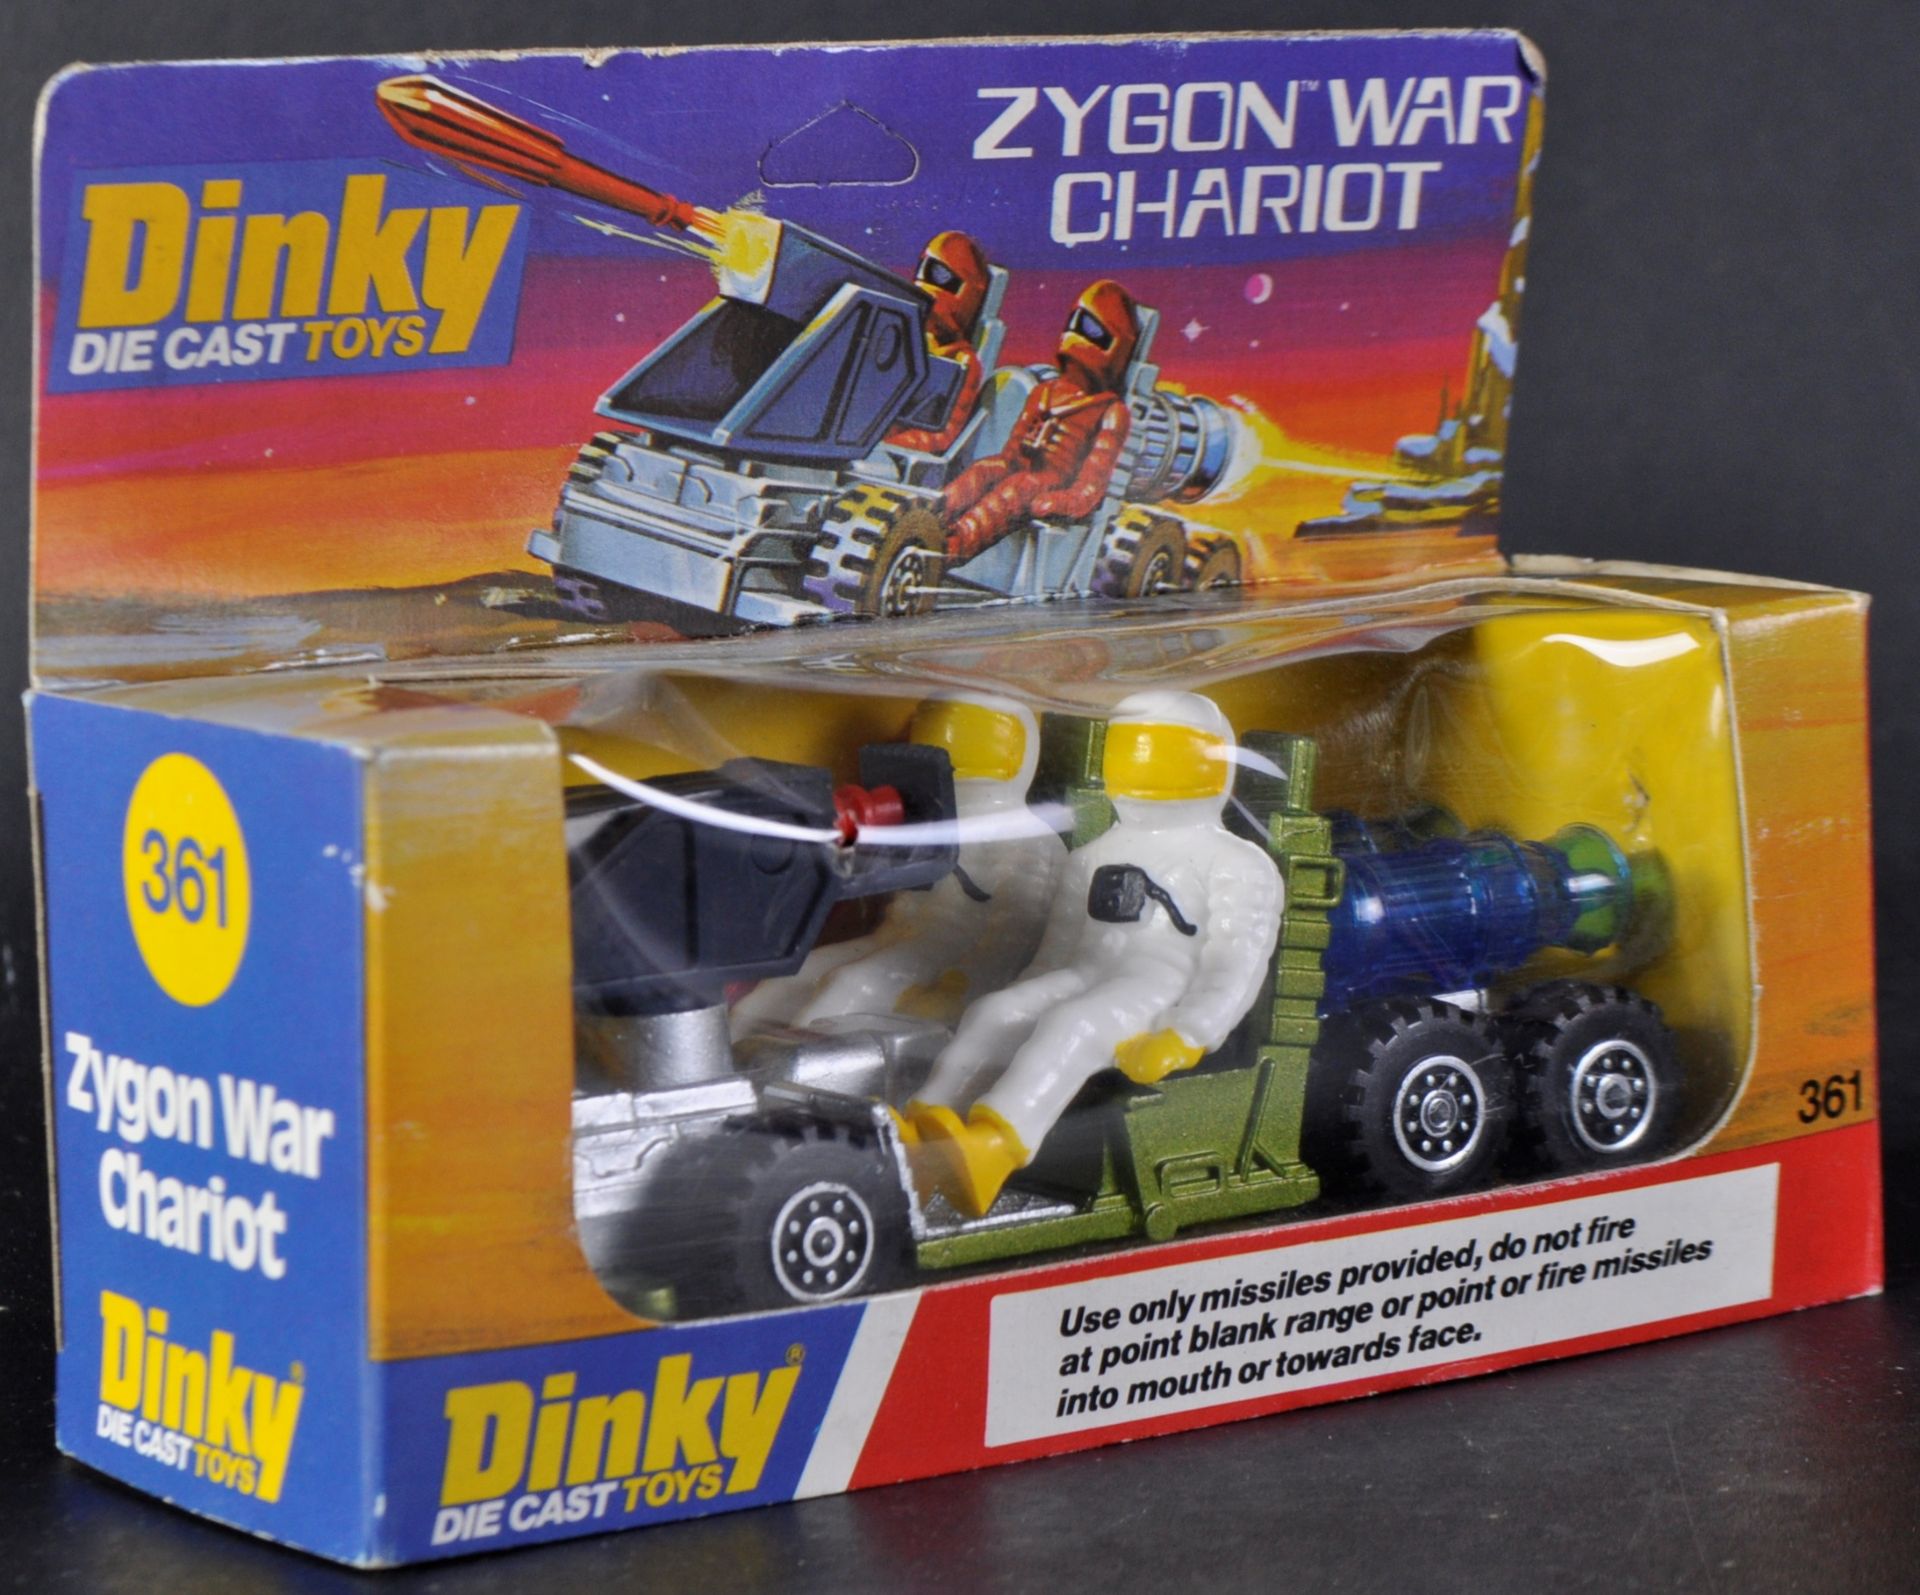 VINTAGE DINKY TOYS DIECAST MODEL ZYGON WAR CHARIOT - Image 5 of 6